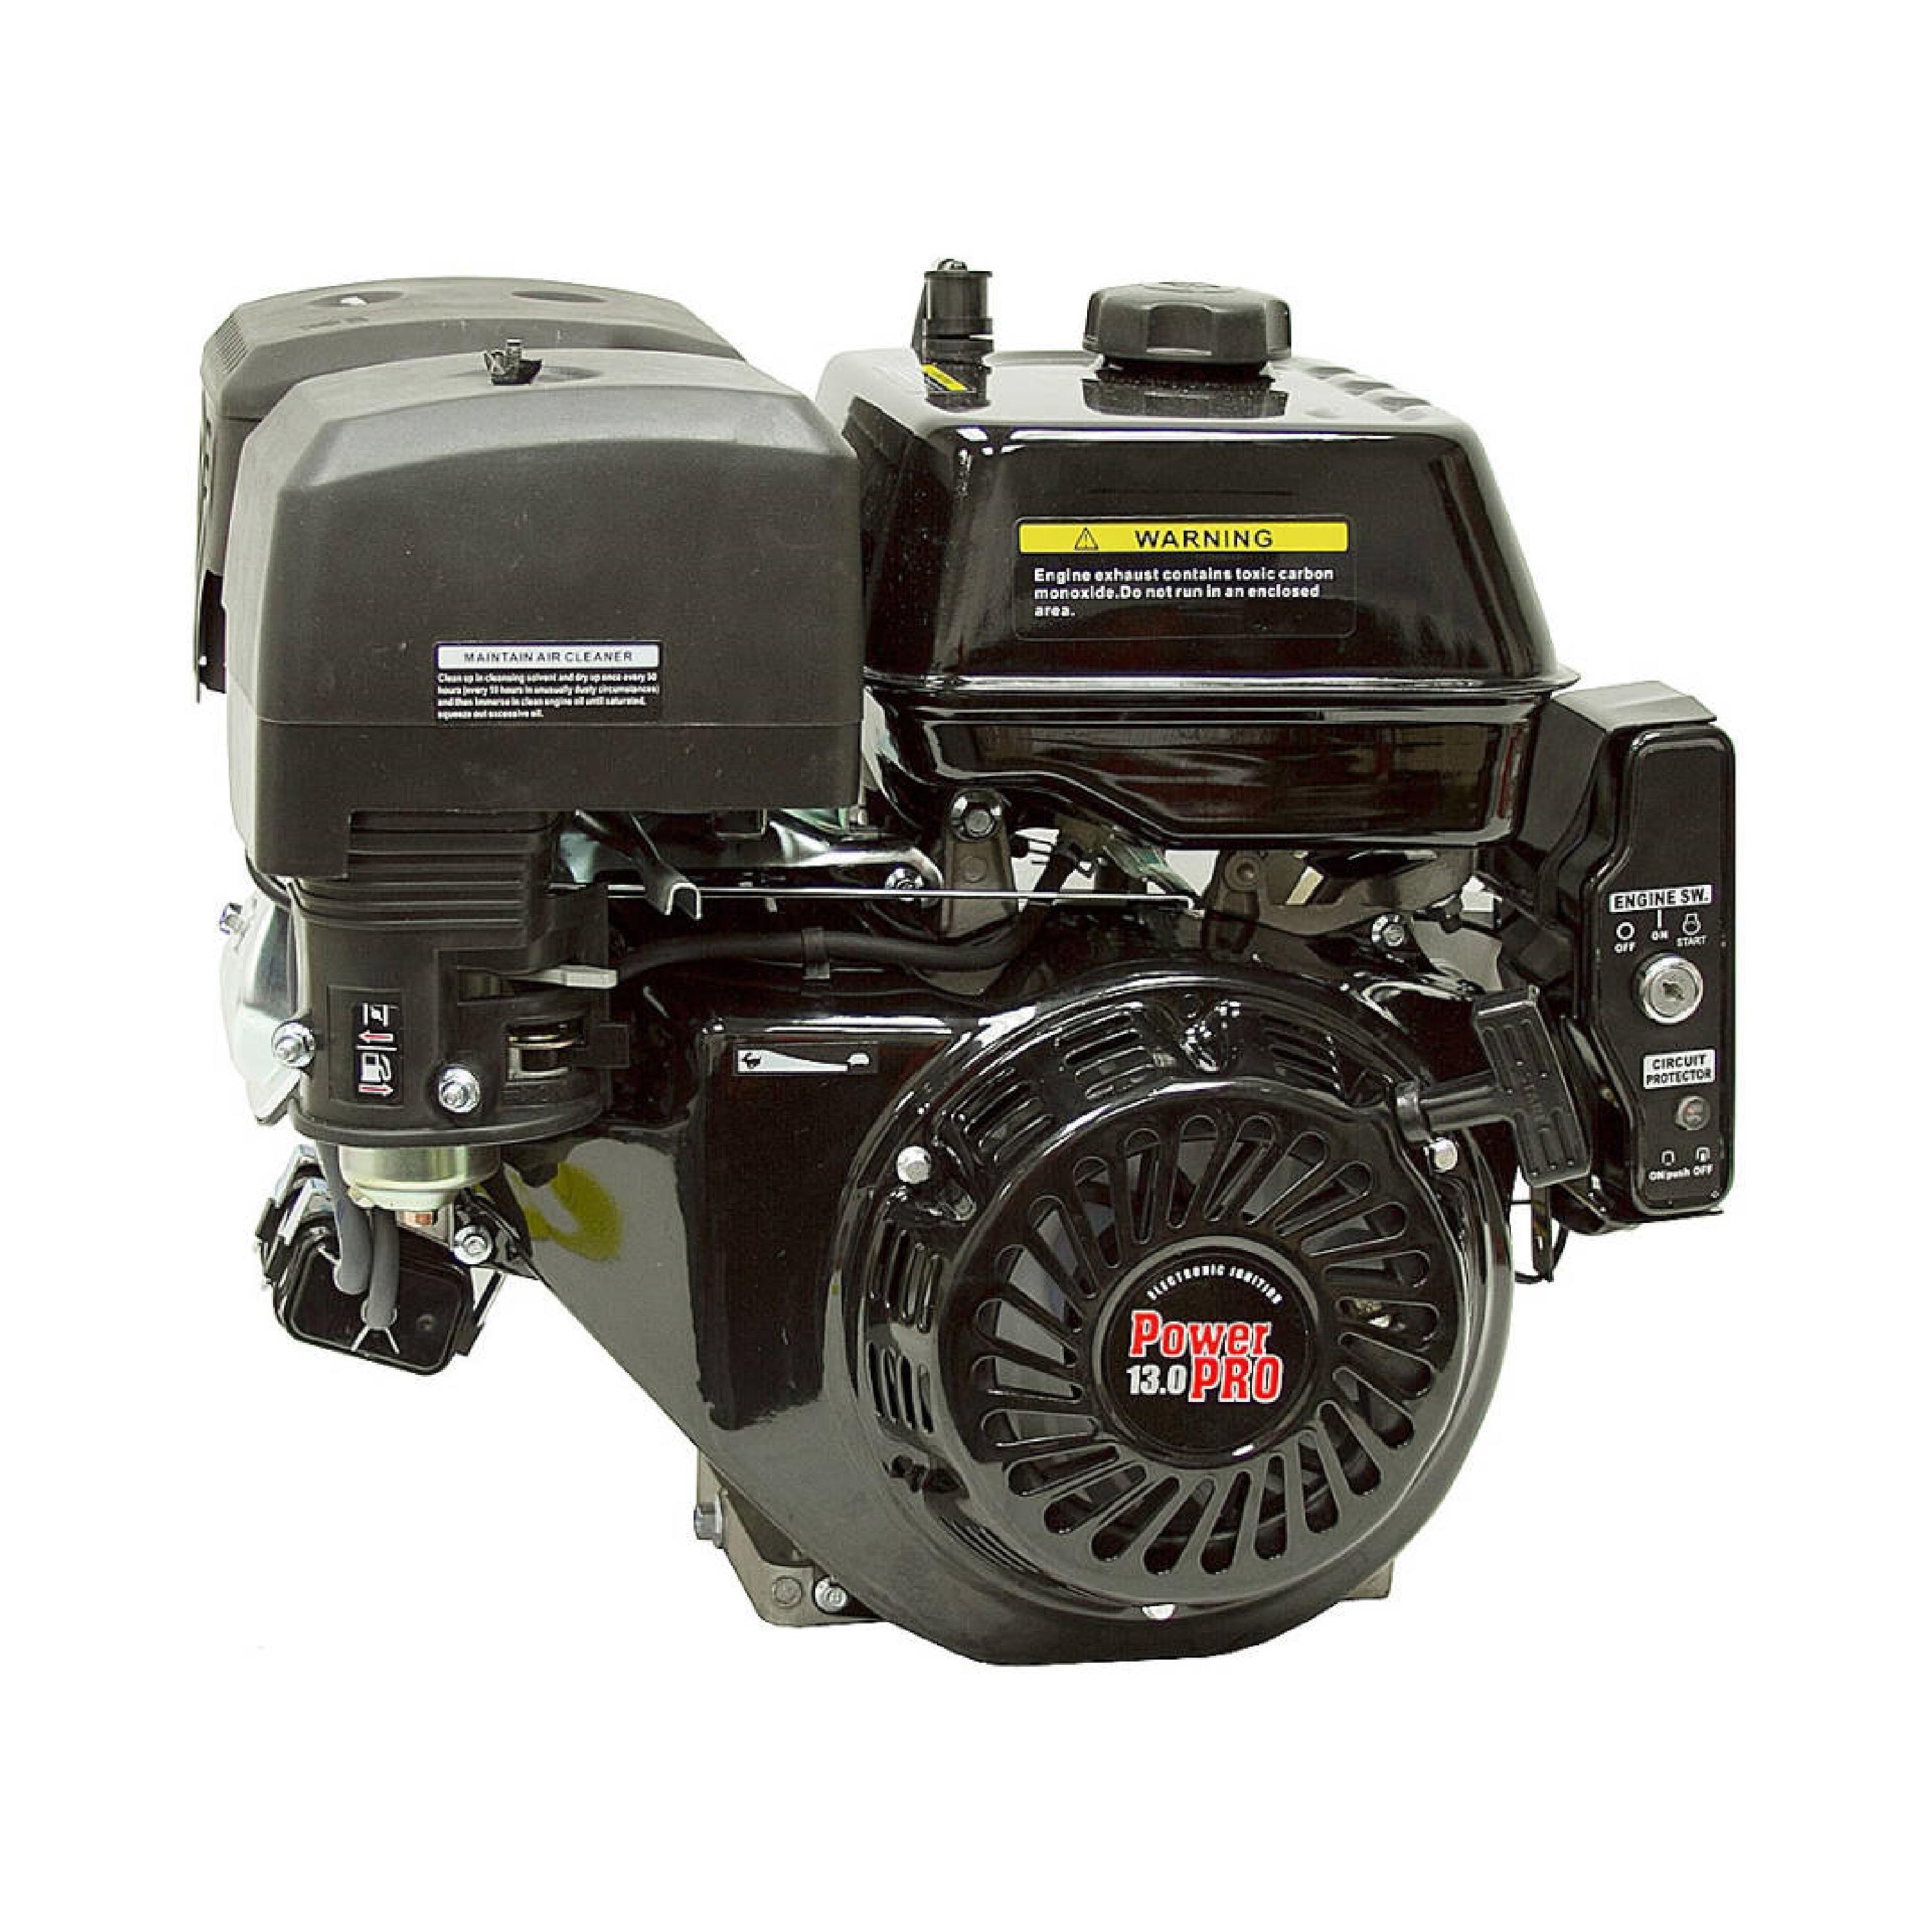 13 HP POWER PRO GAS ENGINE - ELECTRIC START